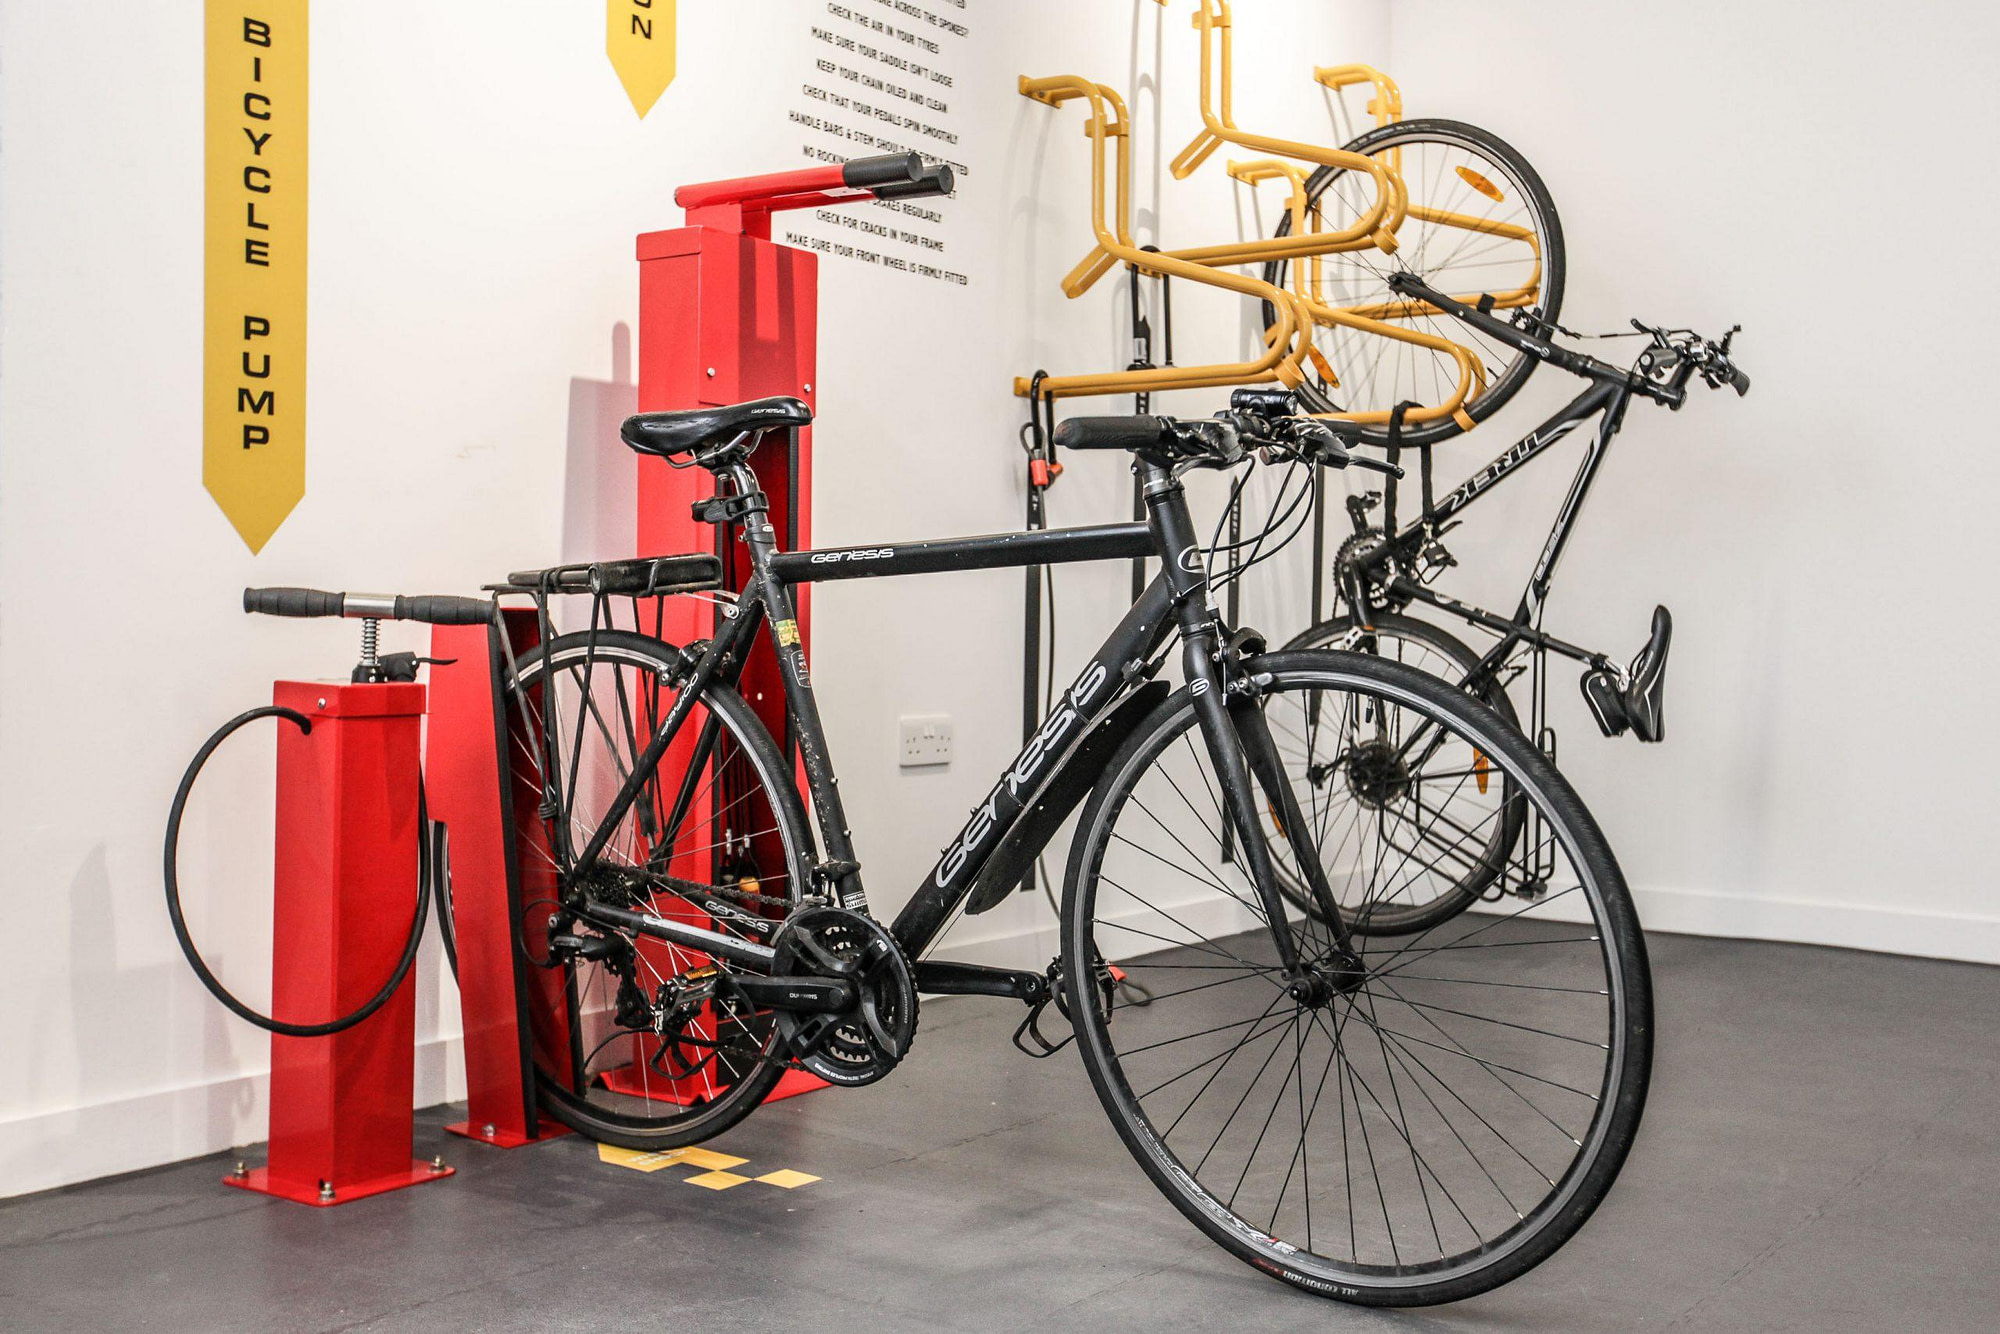 Why Do Commercial Offices Need Bike Repair Stations?